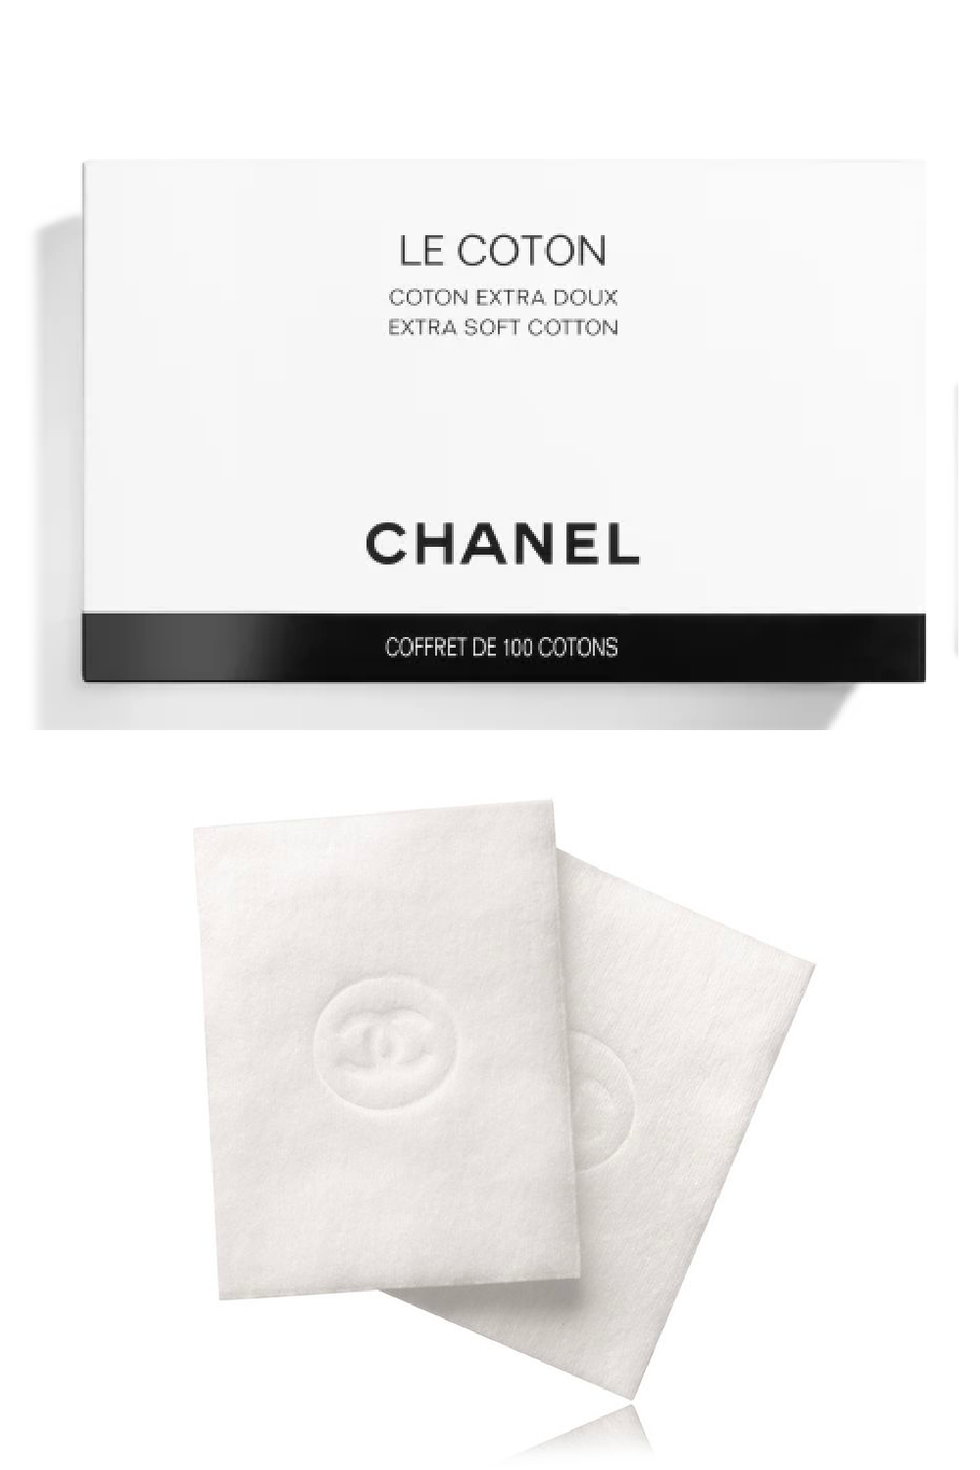 ✅️CHANEL Le Coton Extra Soft Cotton Pads (100 counts) New in Sealed Box 